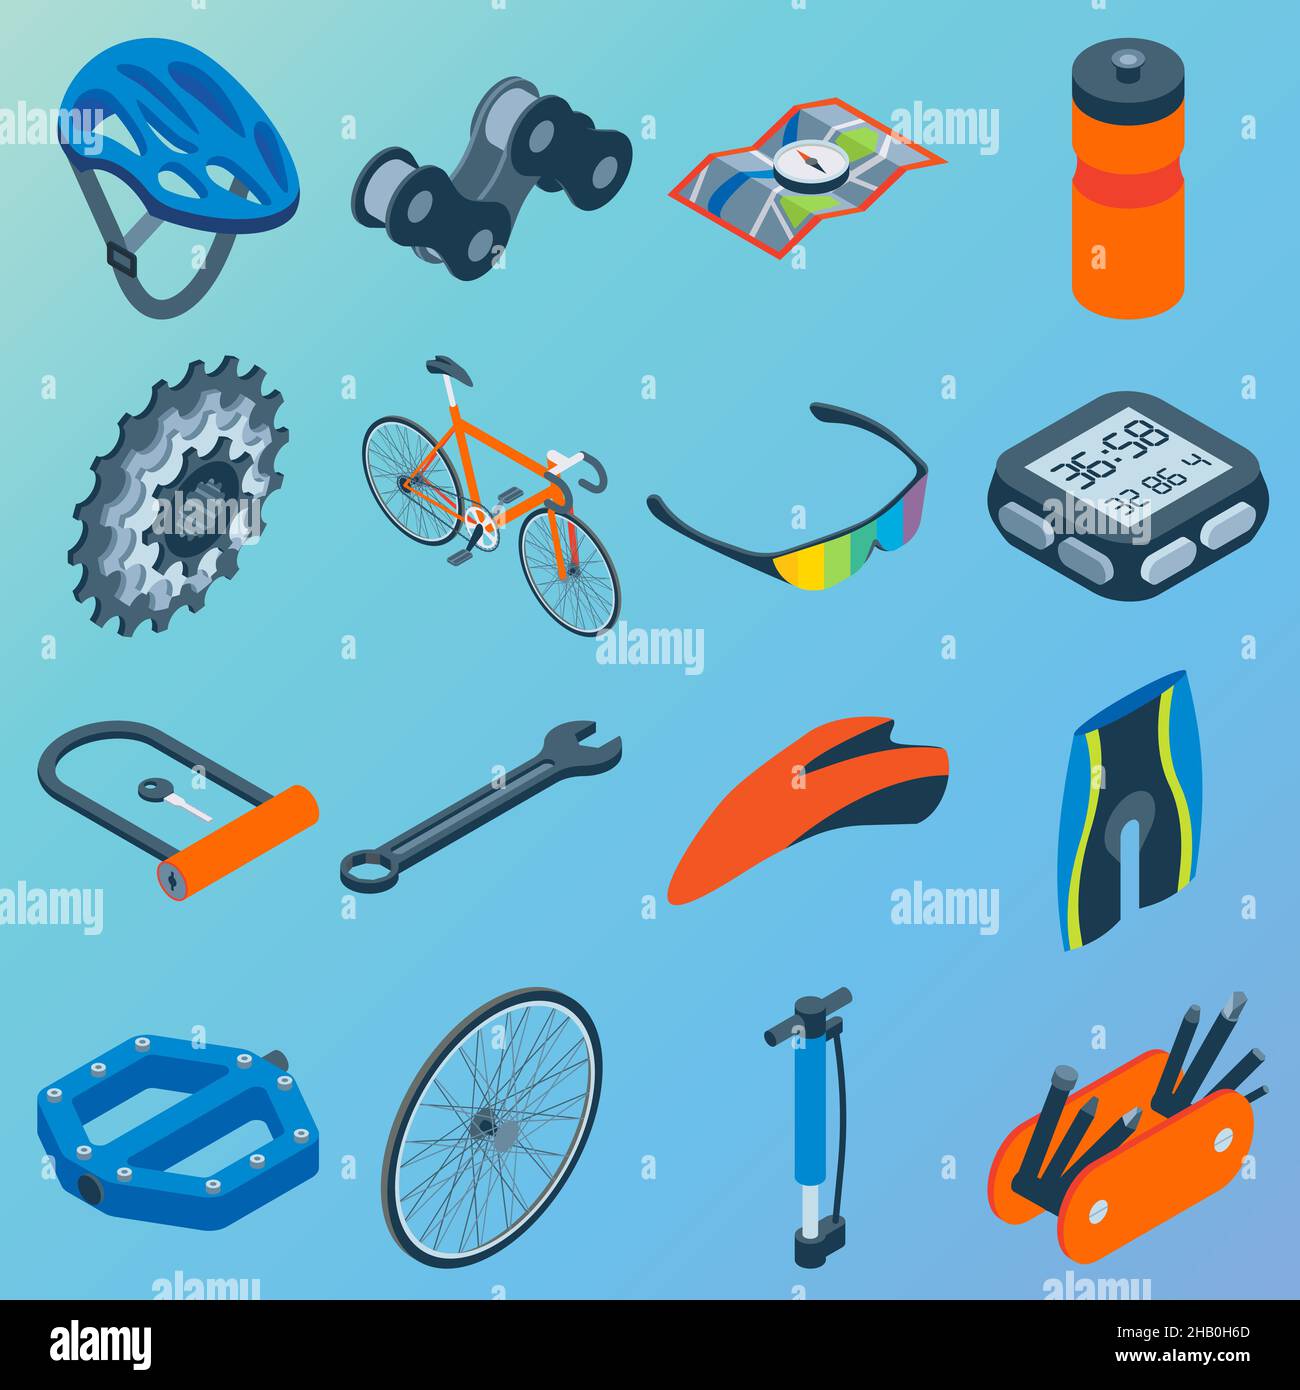 Bicycle repair maintenance tools spare parts accessories isometric